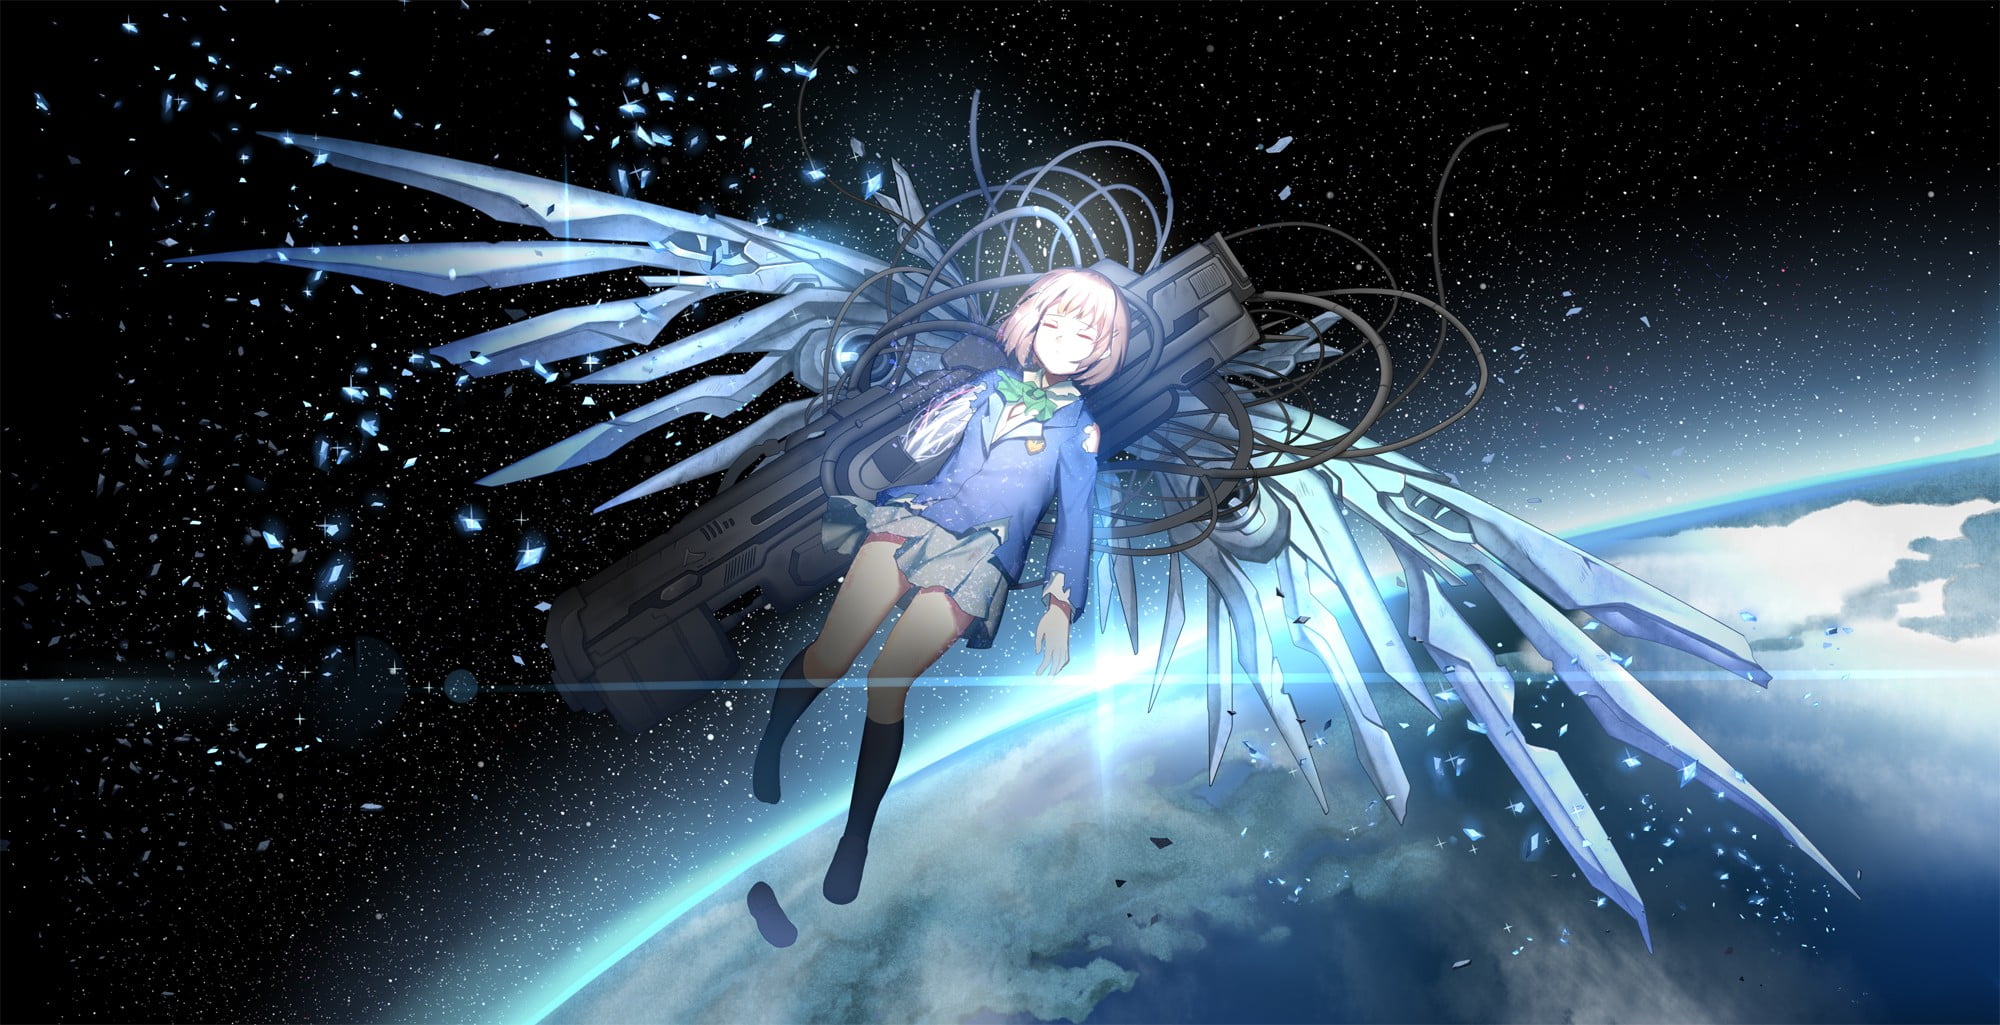 anime character illustration, wings, weapon, space, Earth